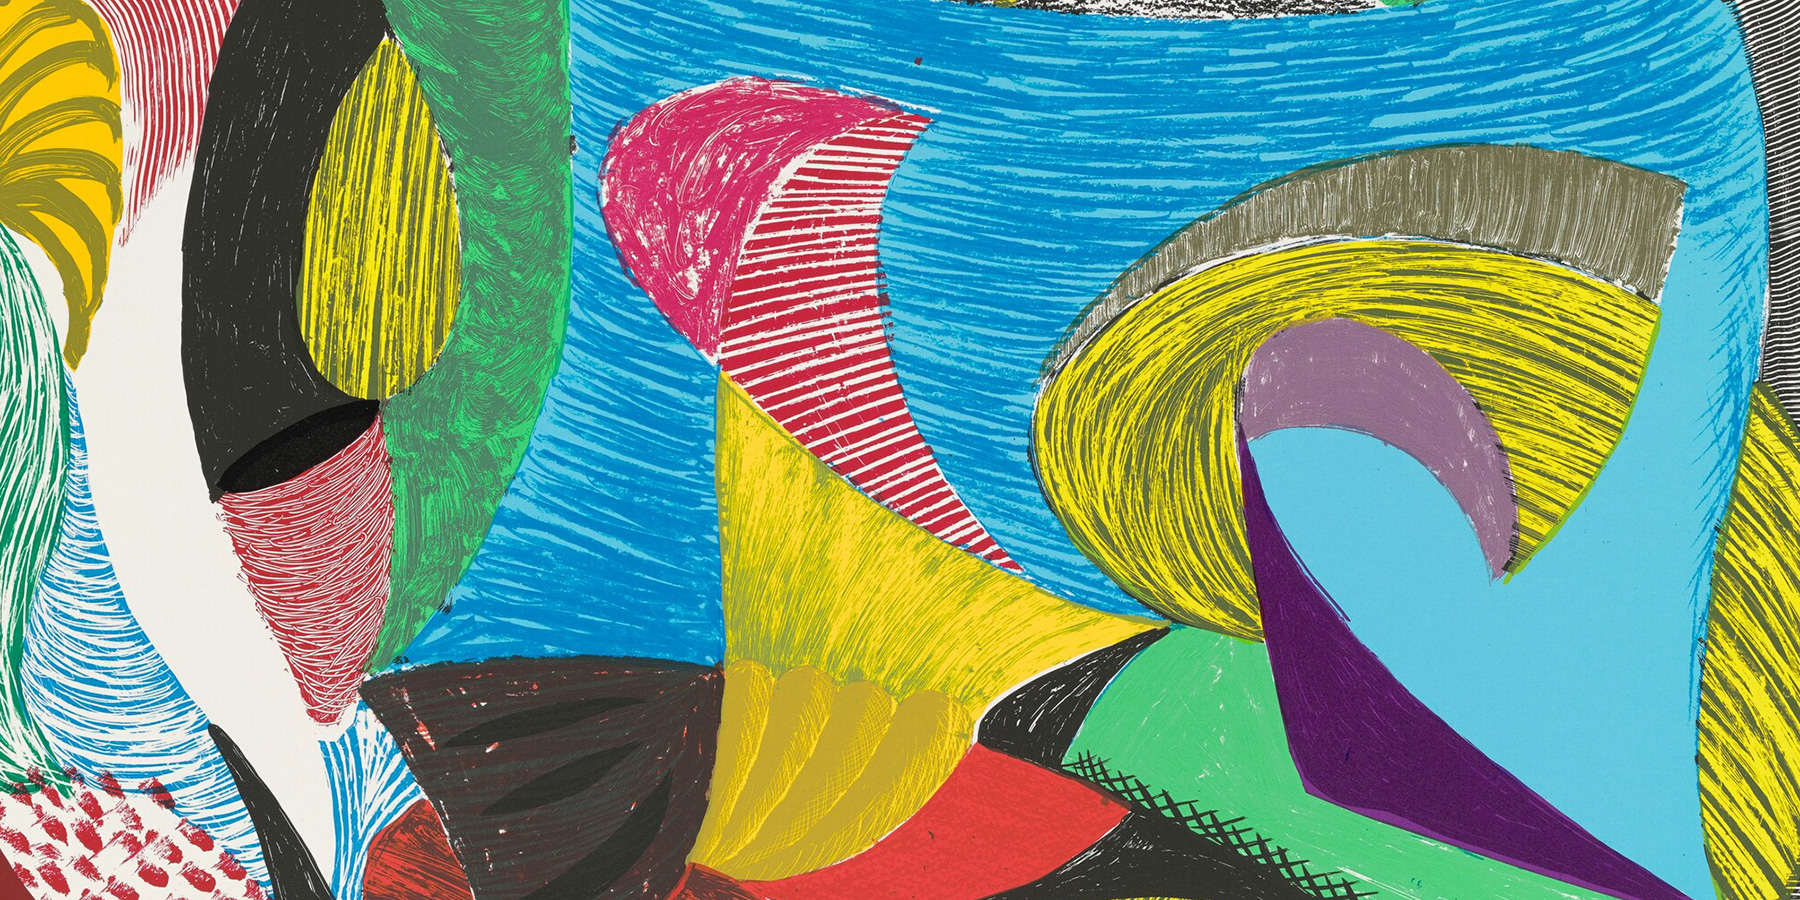 Queer artist David Hockney, Above and Beyond, screenprint on Arches 88 wove paper, National Gallery of Art, 1993/1994